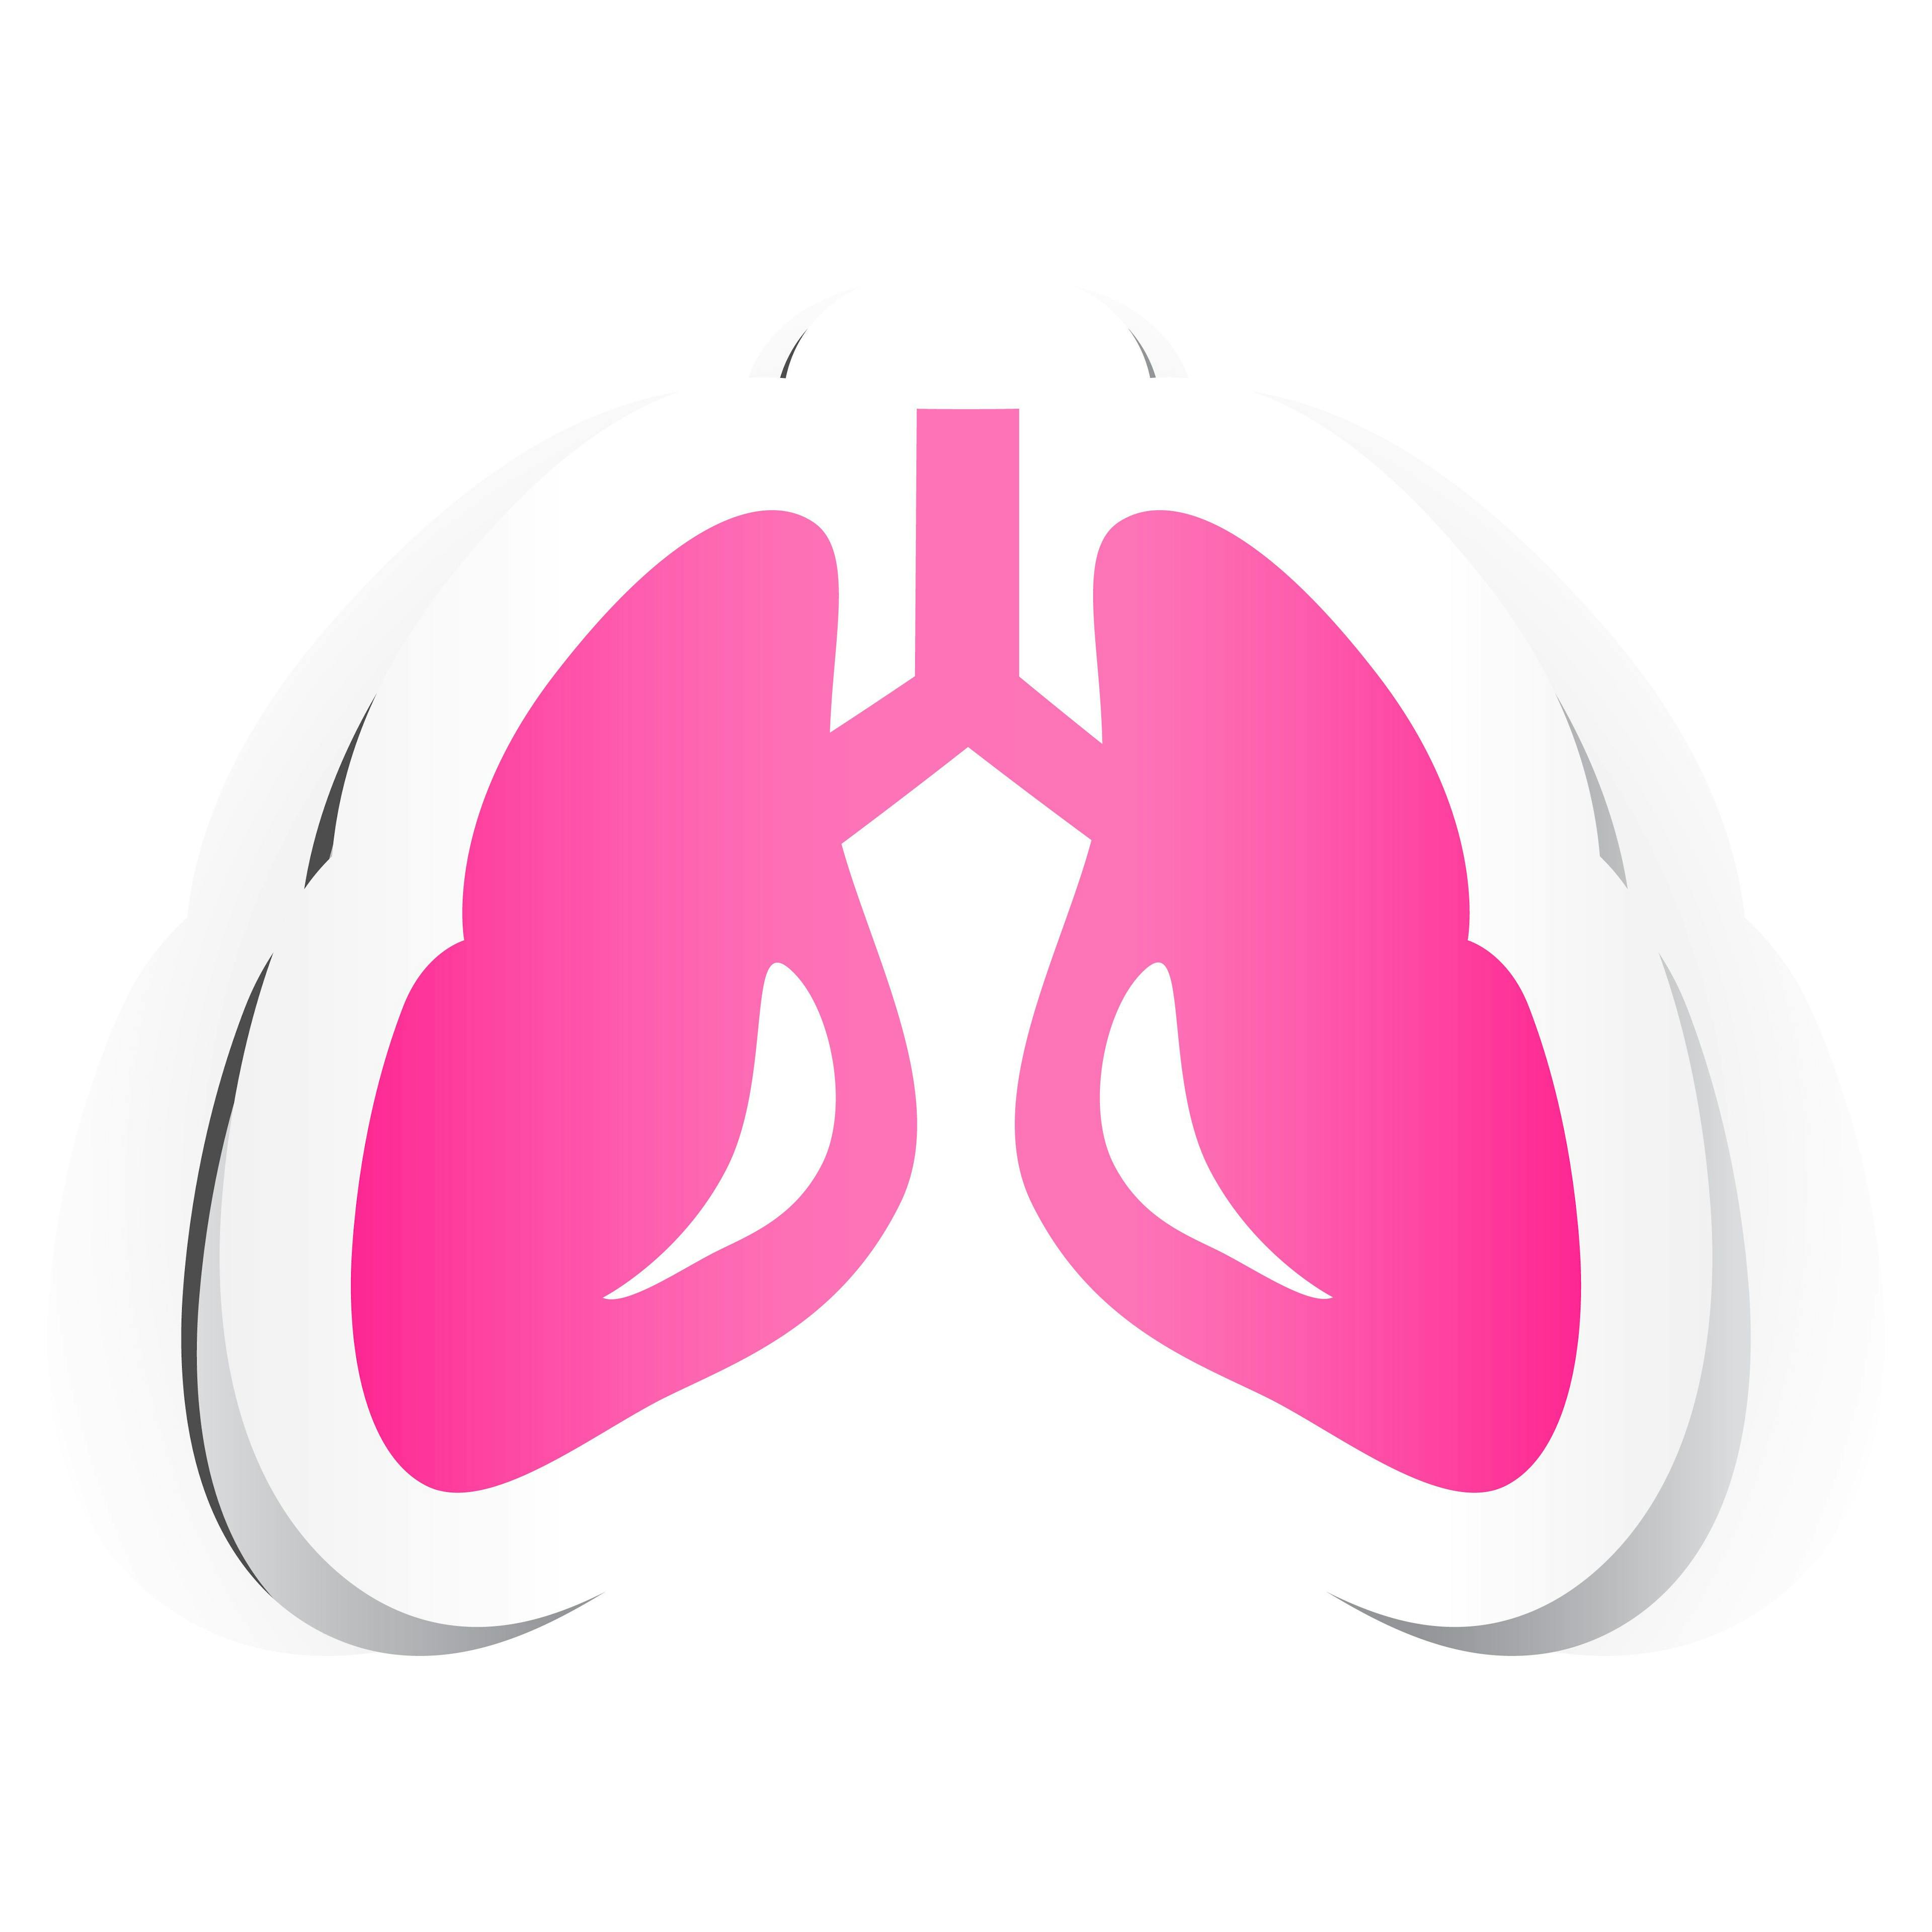 New Guidance for Percutaneous Lung Ablation